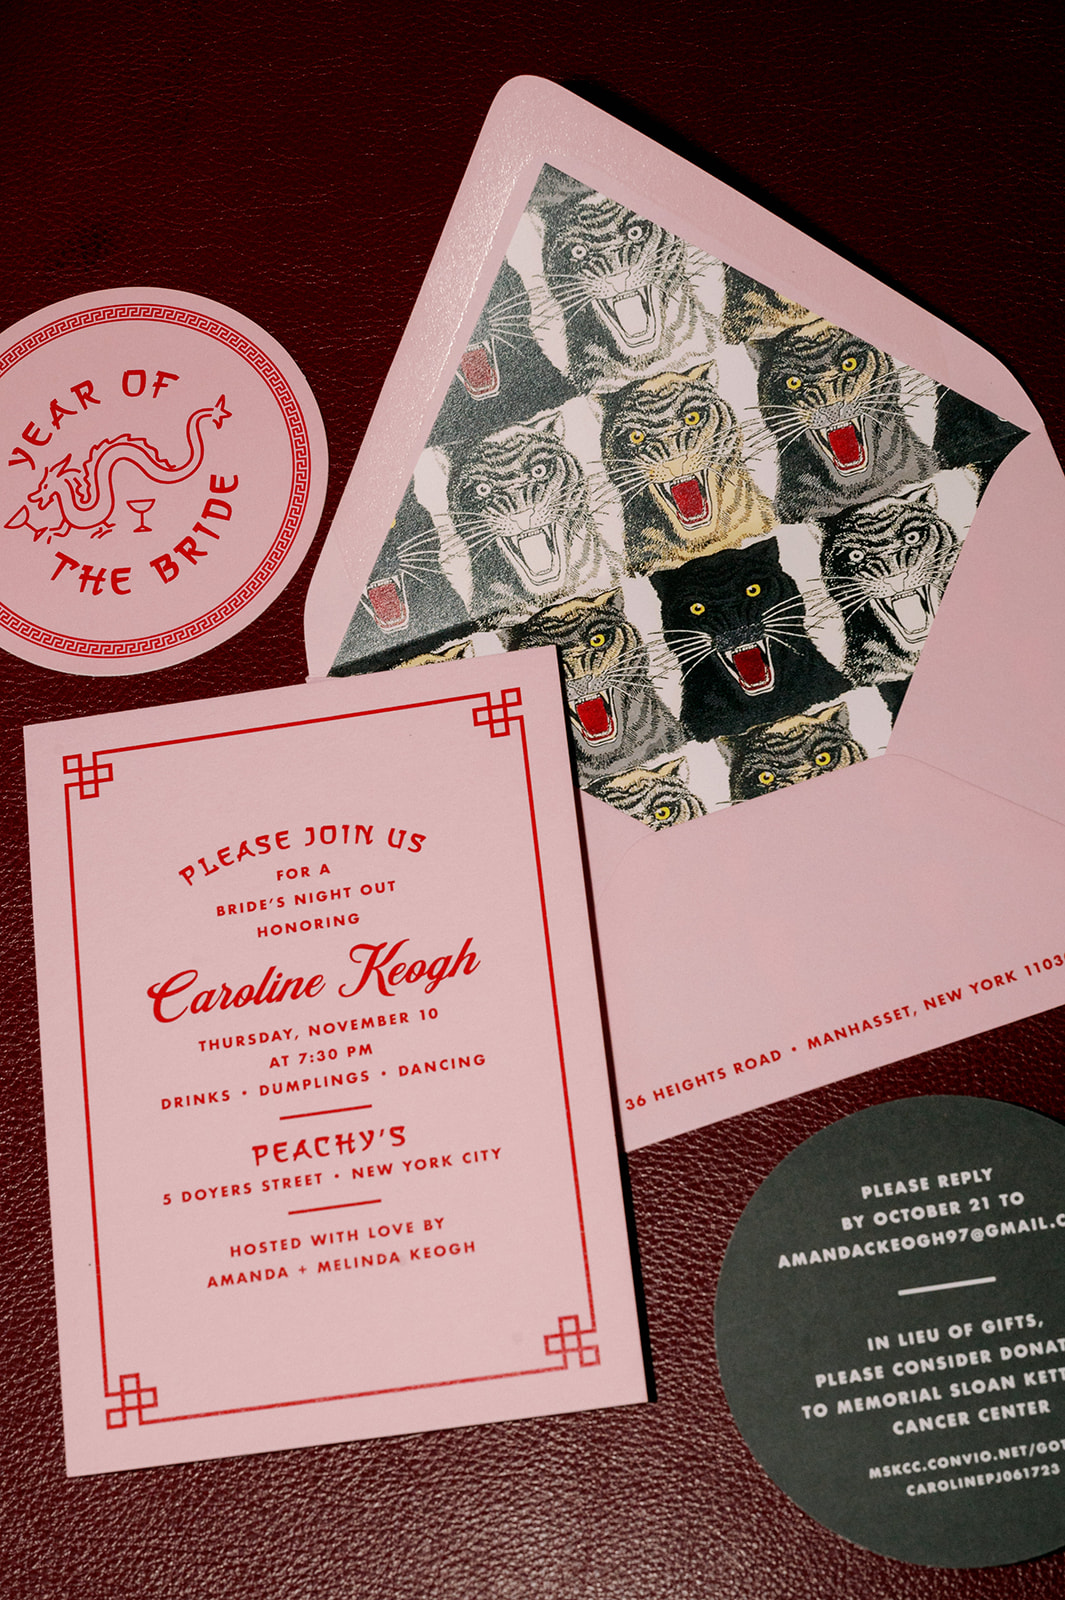 Pink and red invitations to a Thursday night bridal shower at Peachy's bar in Chinatown for Caroline Keogh.